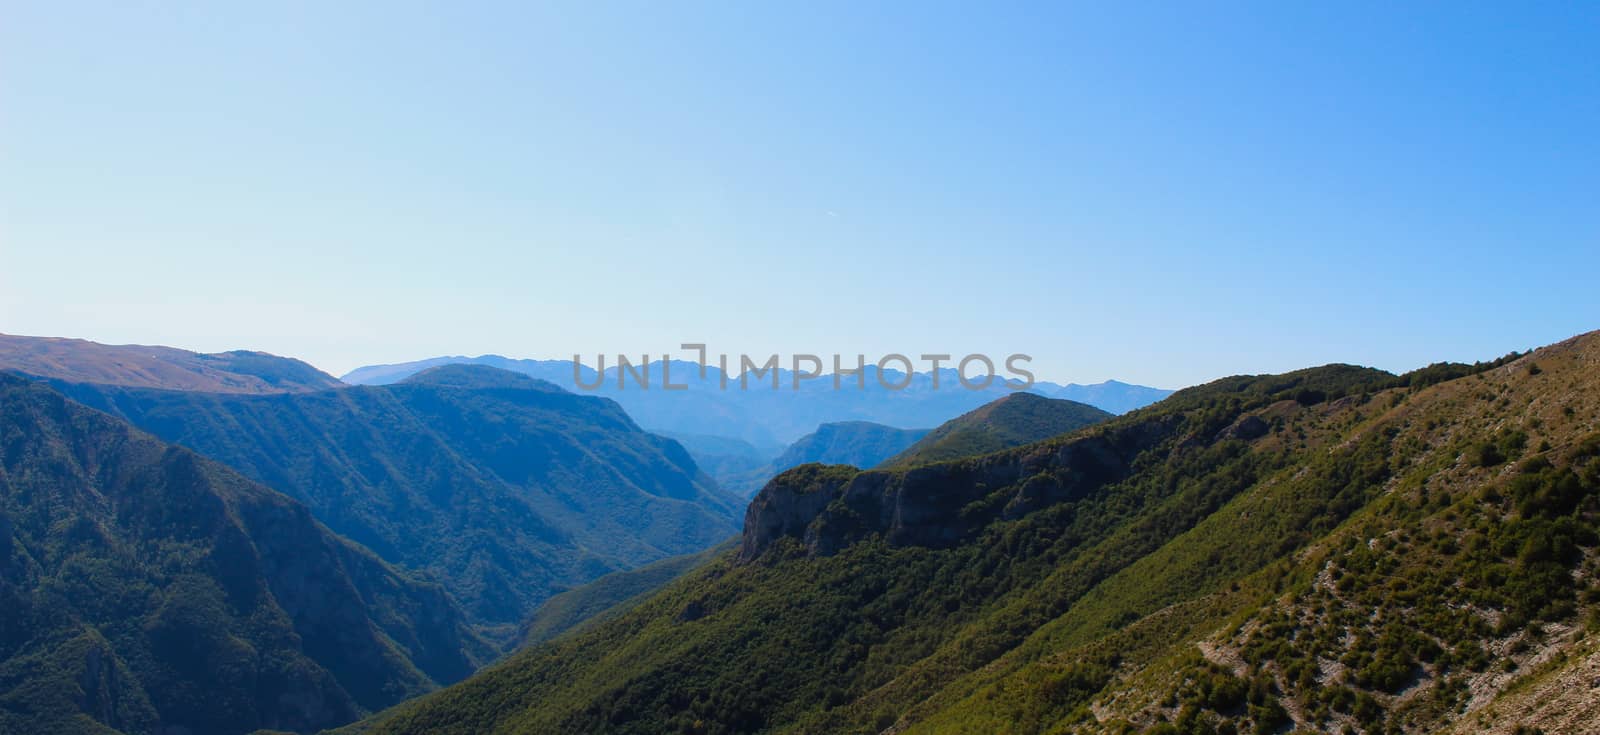 Banner of mountain peaks disappearing in the distance on a beautiful sunny day. Bjelasnica Mountain, Bosnia and Herzegovina.